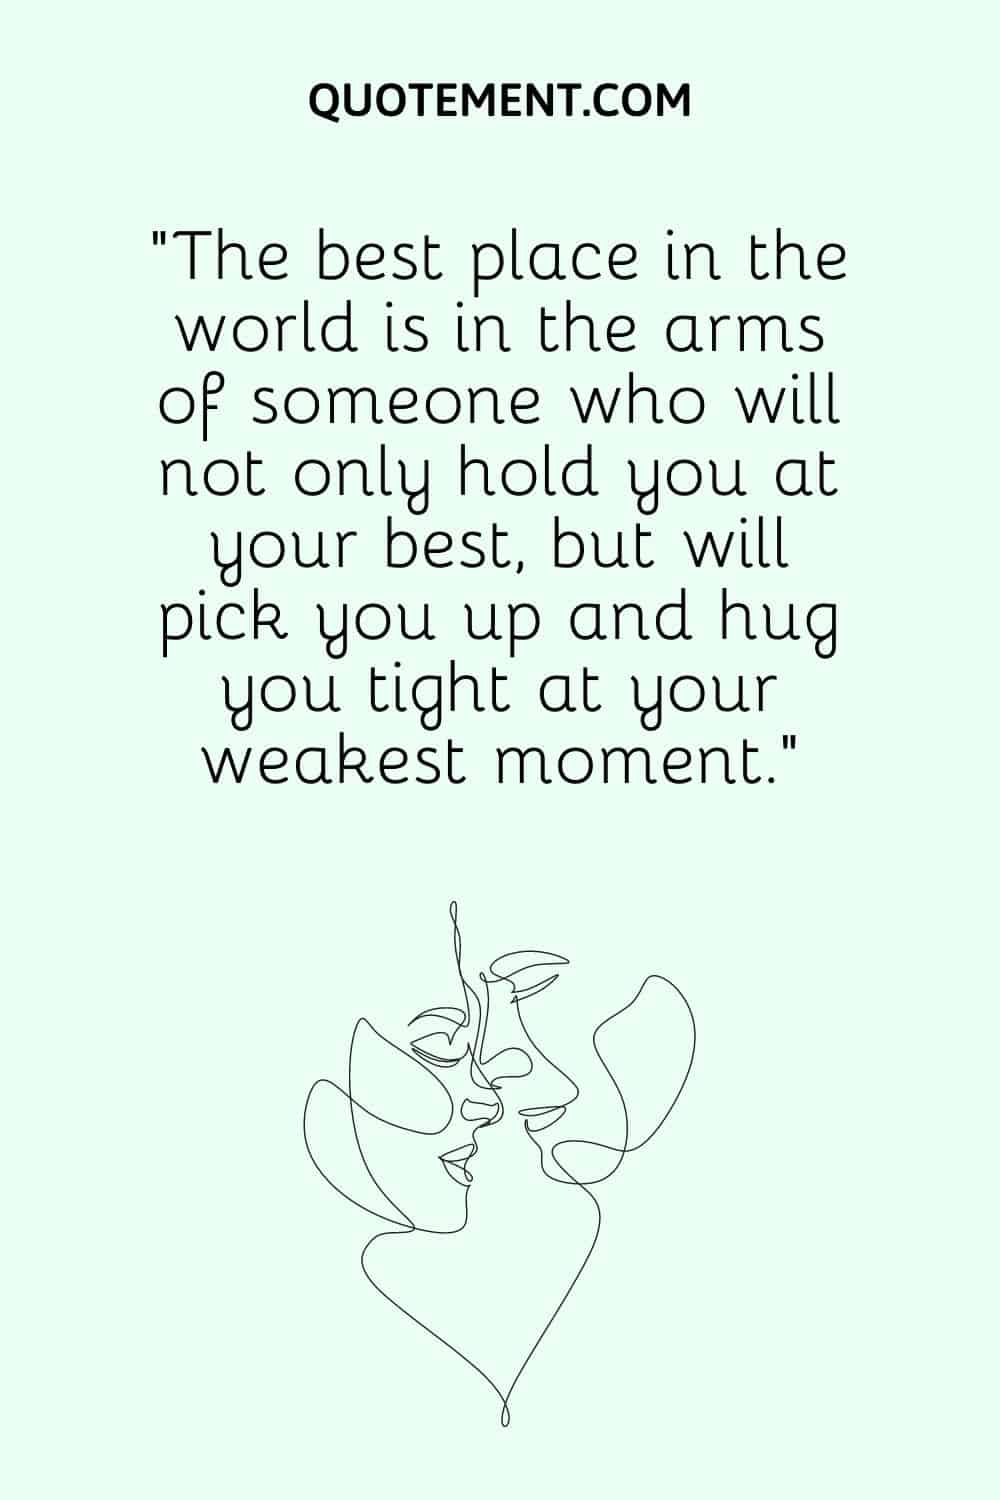 “The best place in the world is in the arms of someone who will not only hold you at your best, but will pick you up and hug you tight at your weakest moment.”